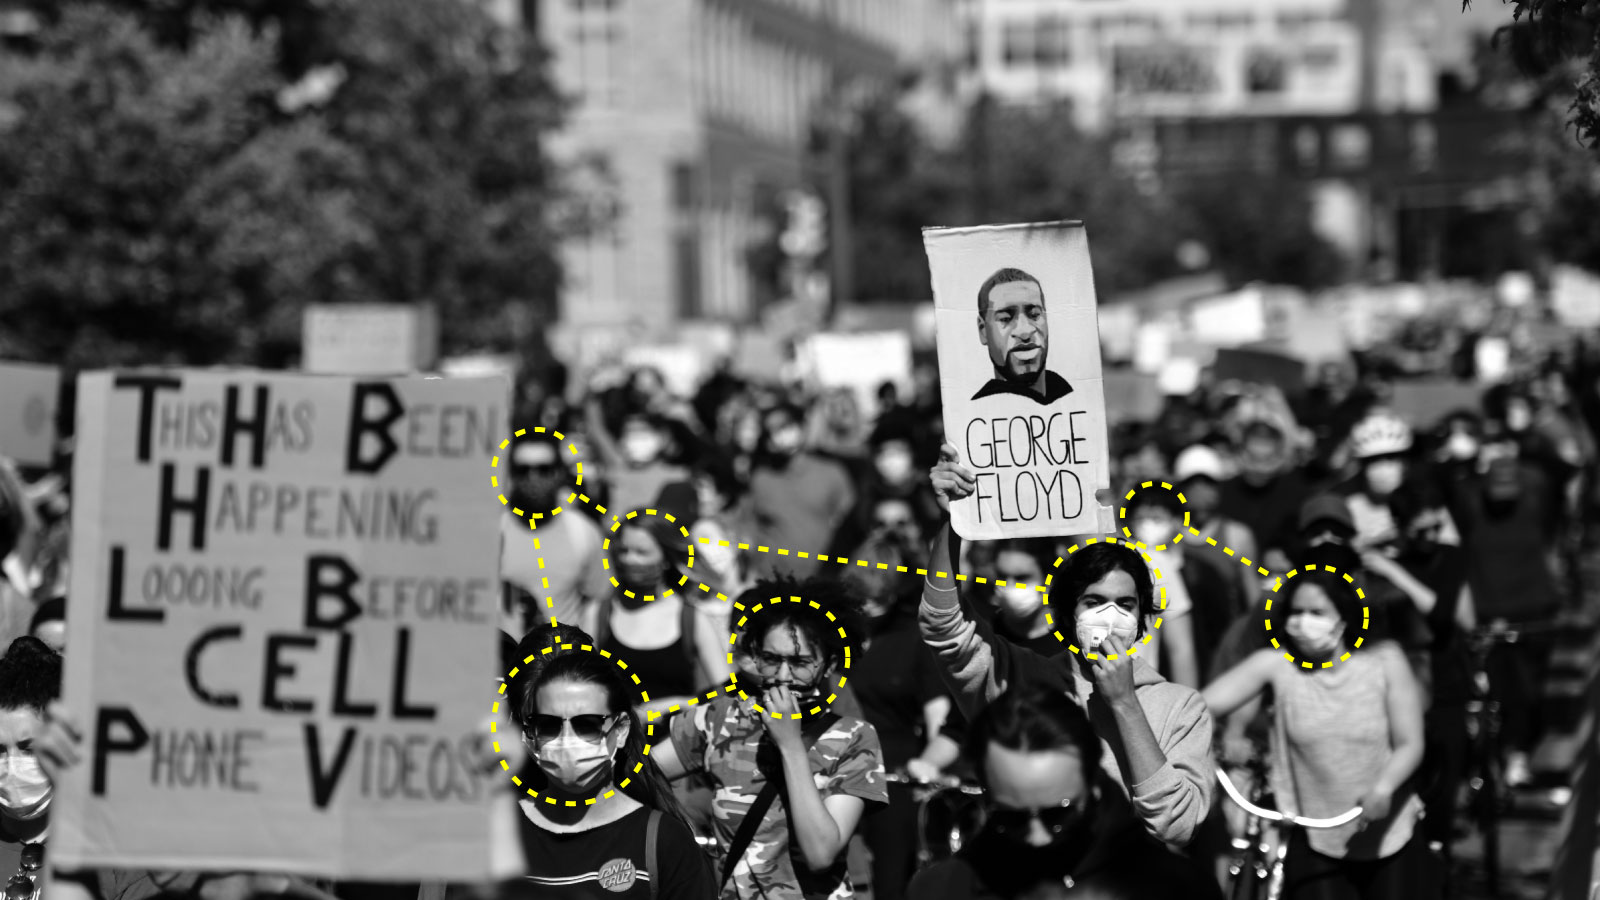 Photograph of a BLM protest with surveillance network drawn over it